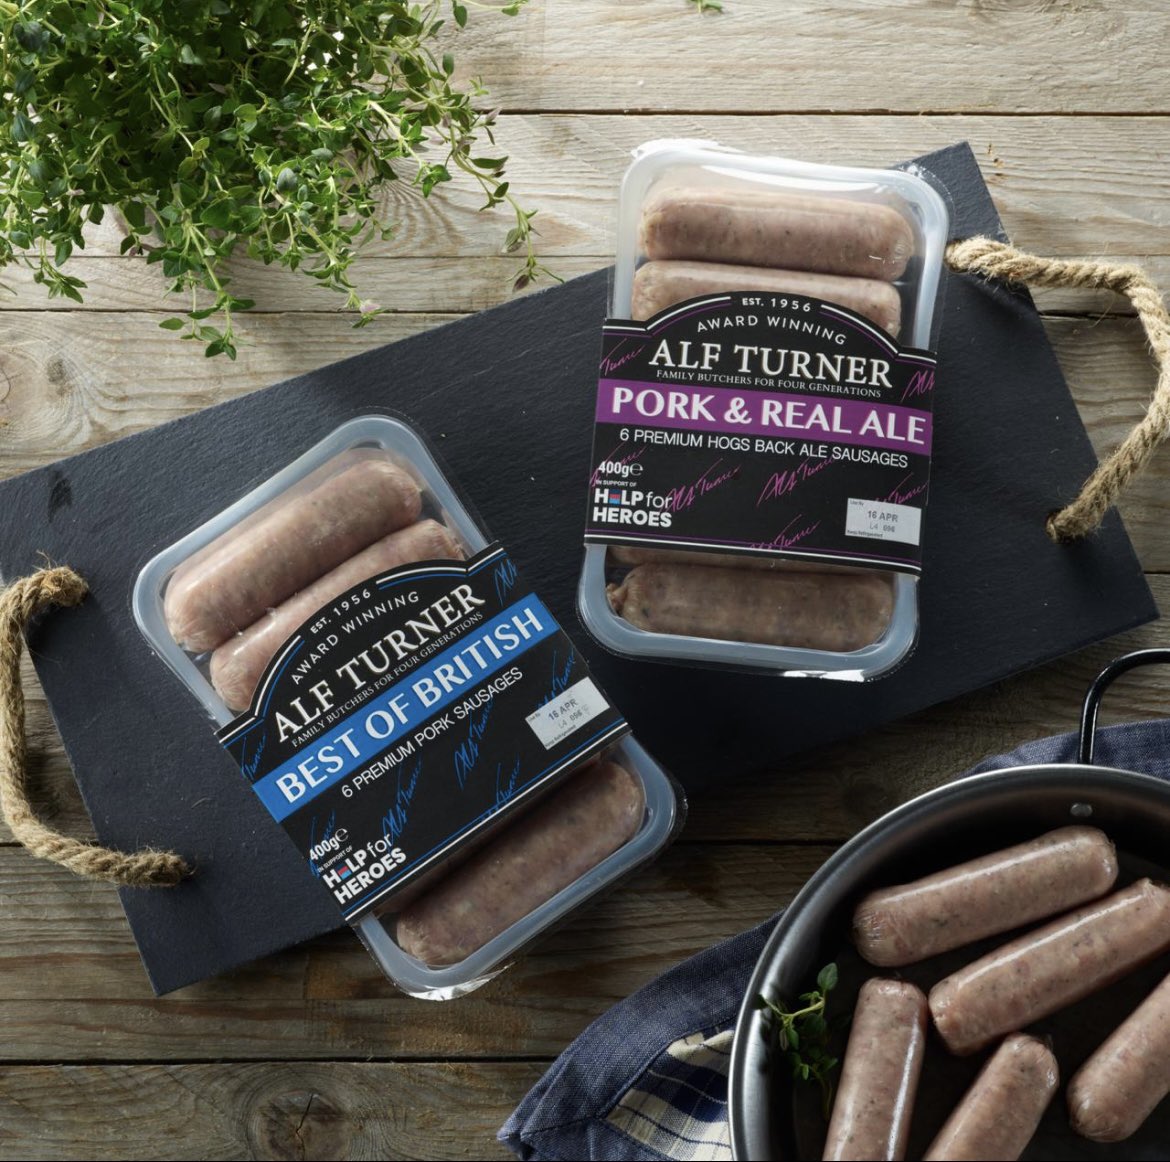 Right who wants to Win a box Of our award winning sausages now the summer is here☀️💥#winitwednesday 
Simply follow us RT this post and Tag a friend to win 🥇
Winner picked Friday 8pm 
Sold in support of @HelpforHeroes and available exclusively from @Morrisons